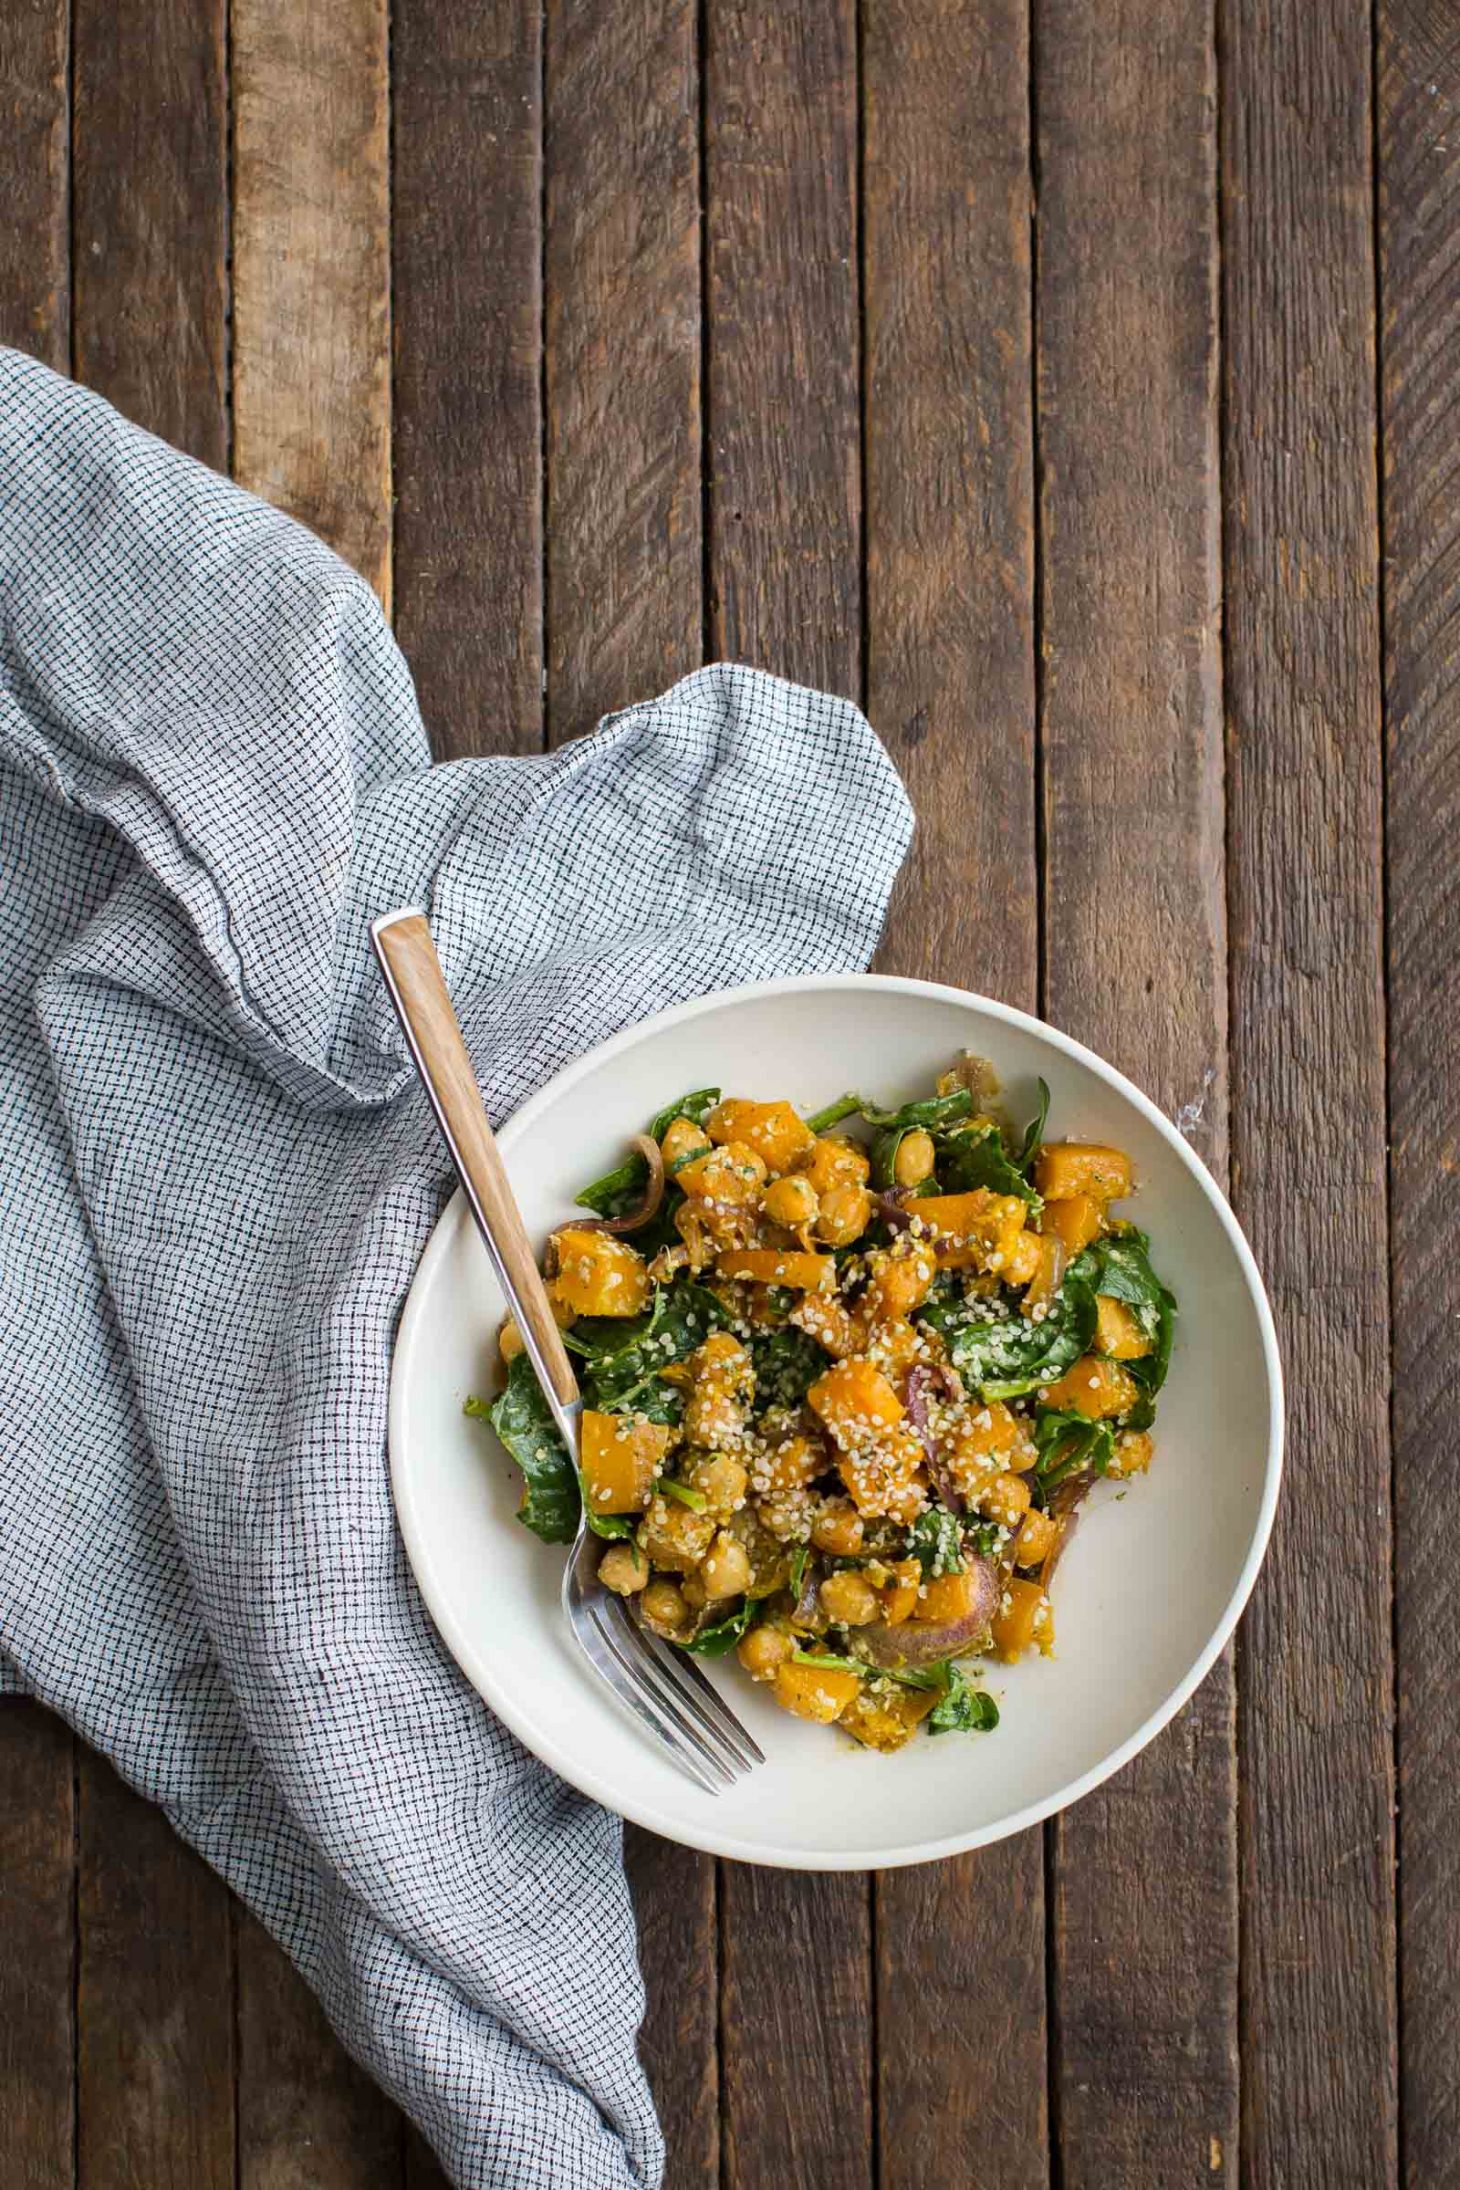 Roasted Butternut Squash Salad with Herbed Hemp Dressing